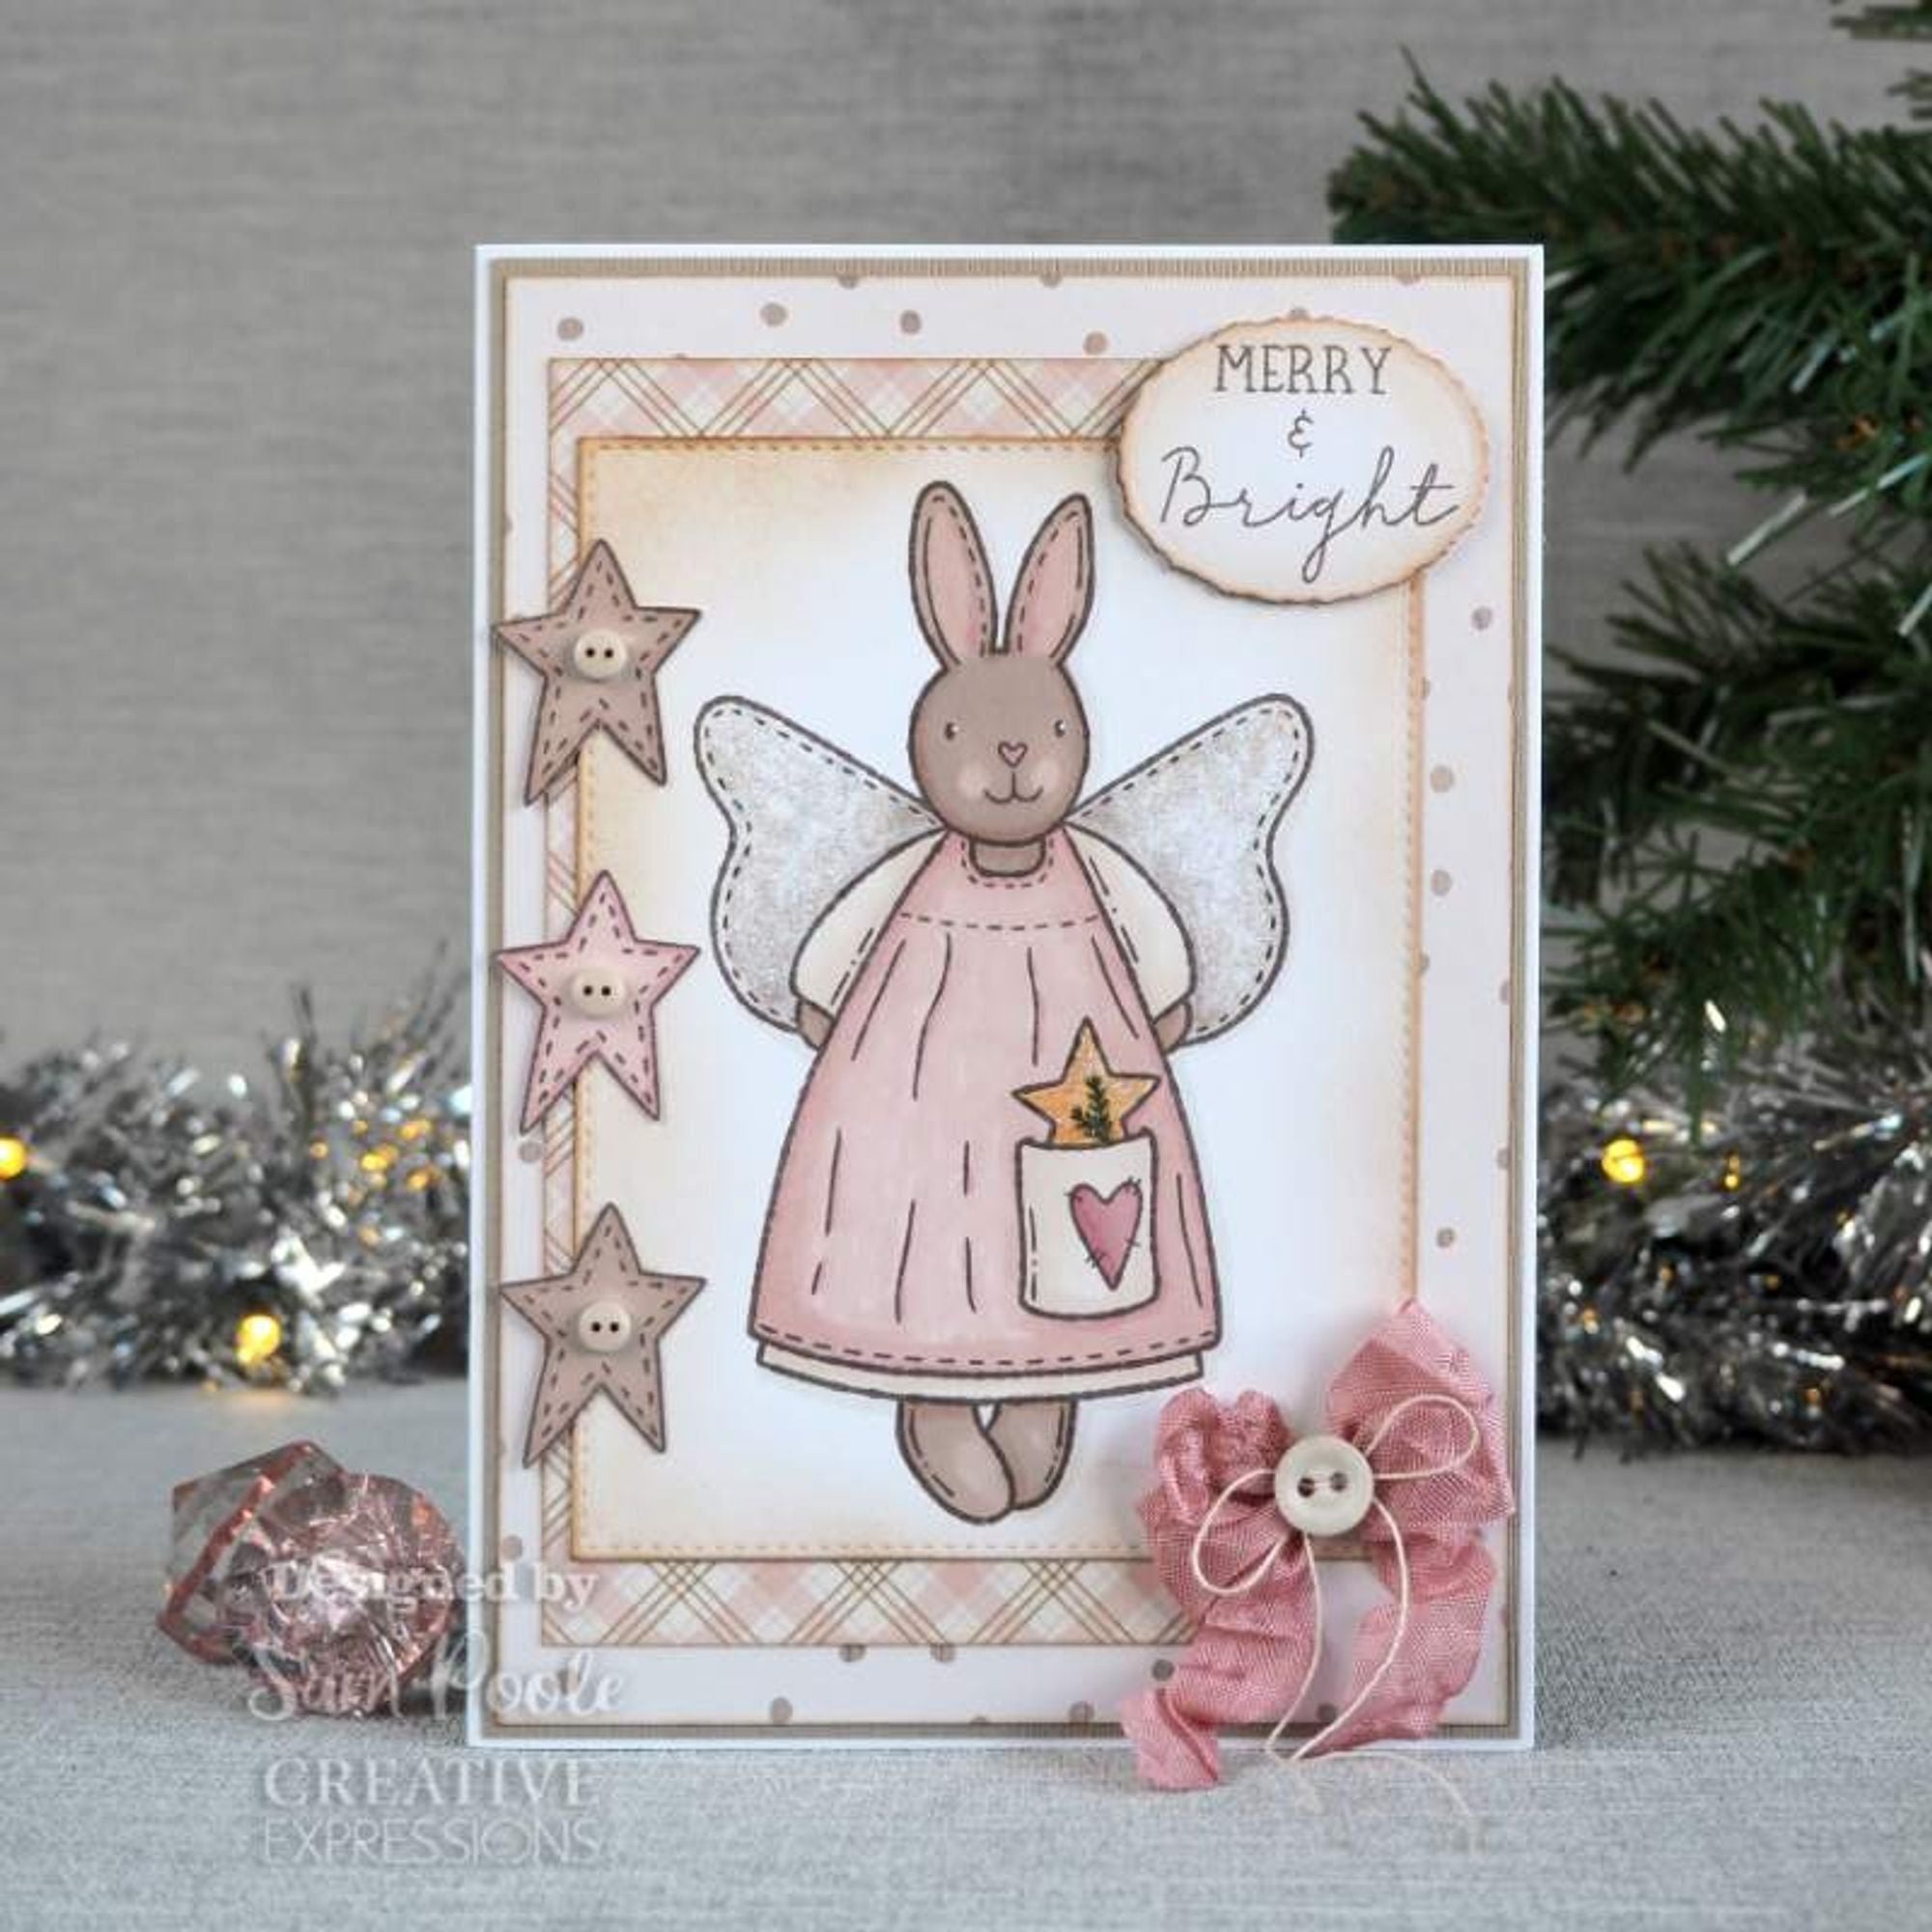 Creative Expressions Sam Poole Angel Bunny 6 in x 4 in Clear Stamp Set